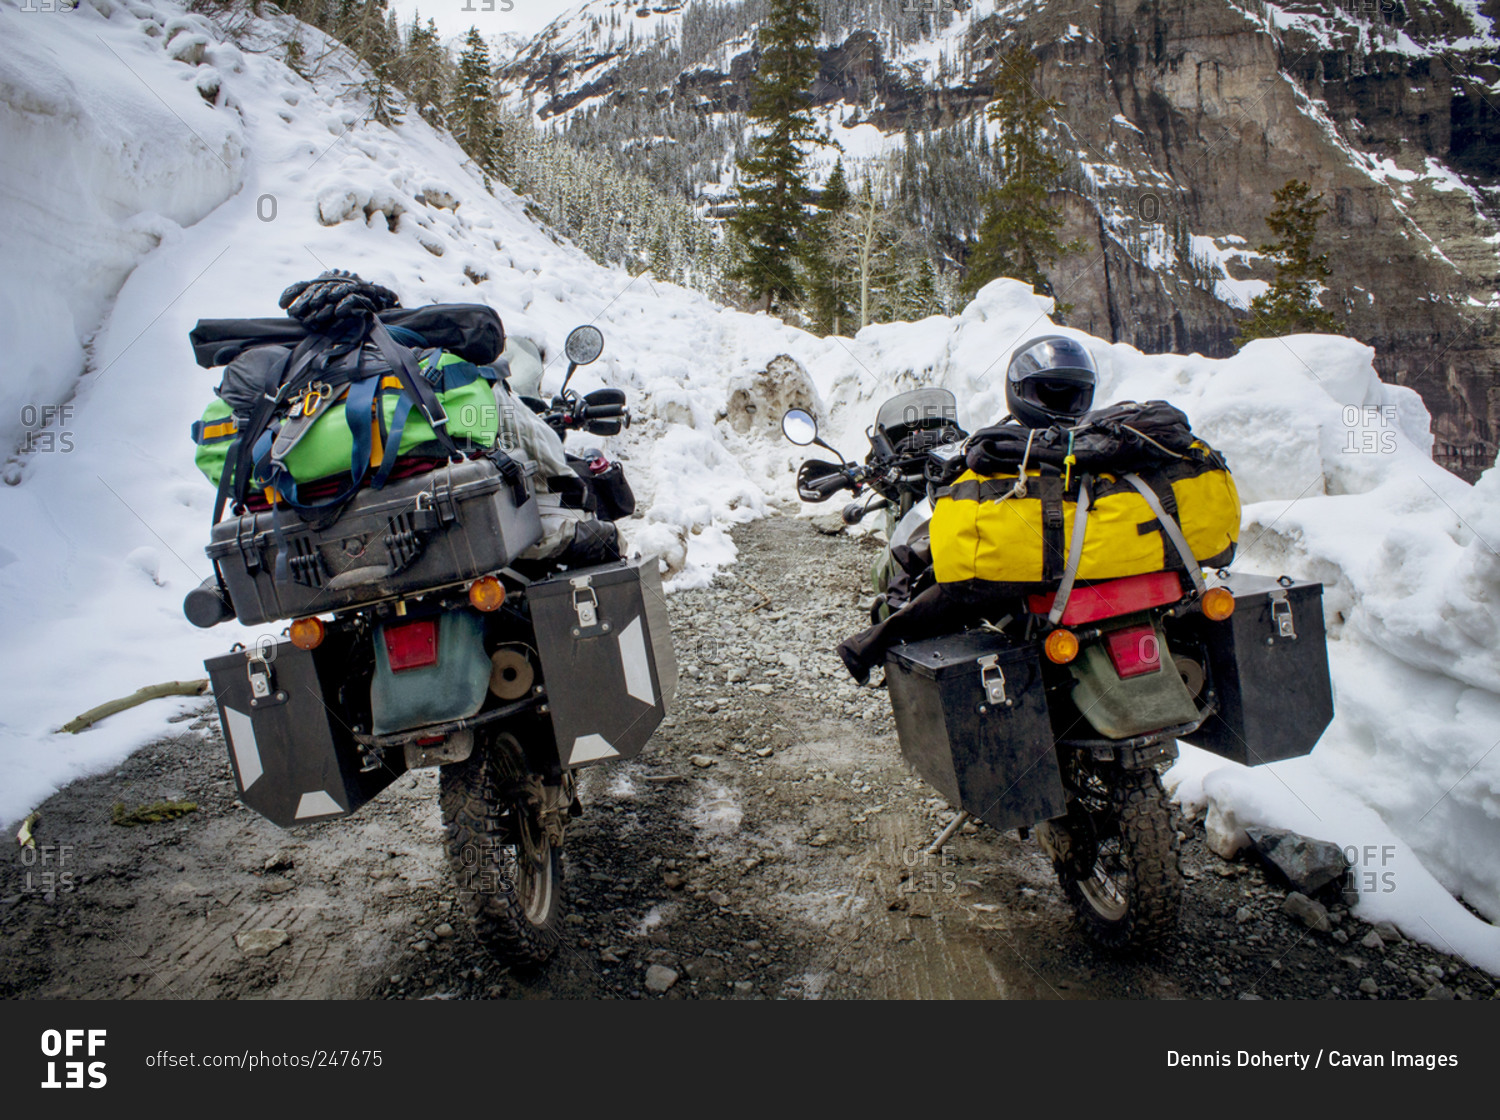 Motorcycles packed with travel gear in winter